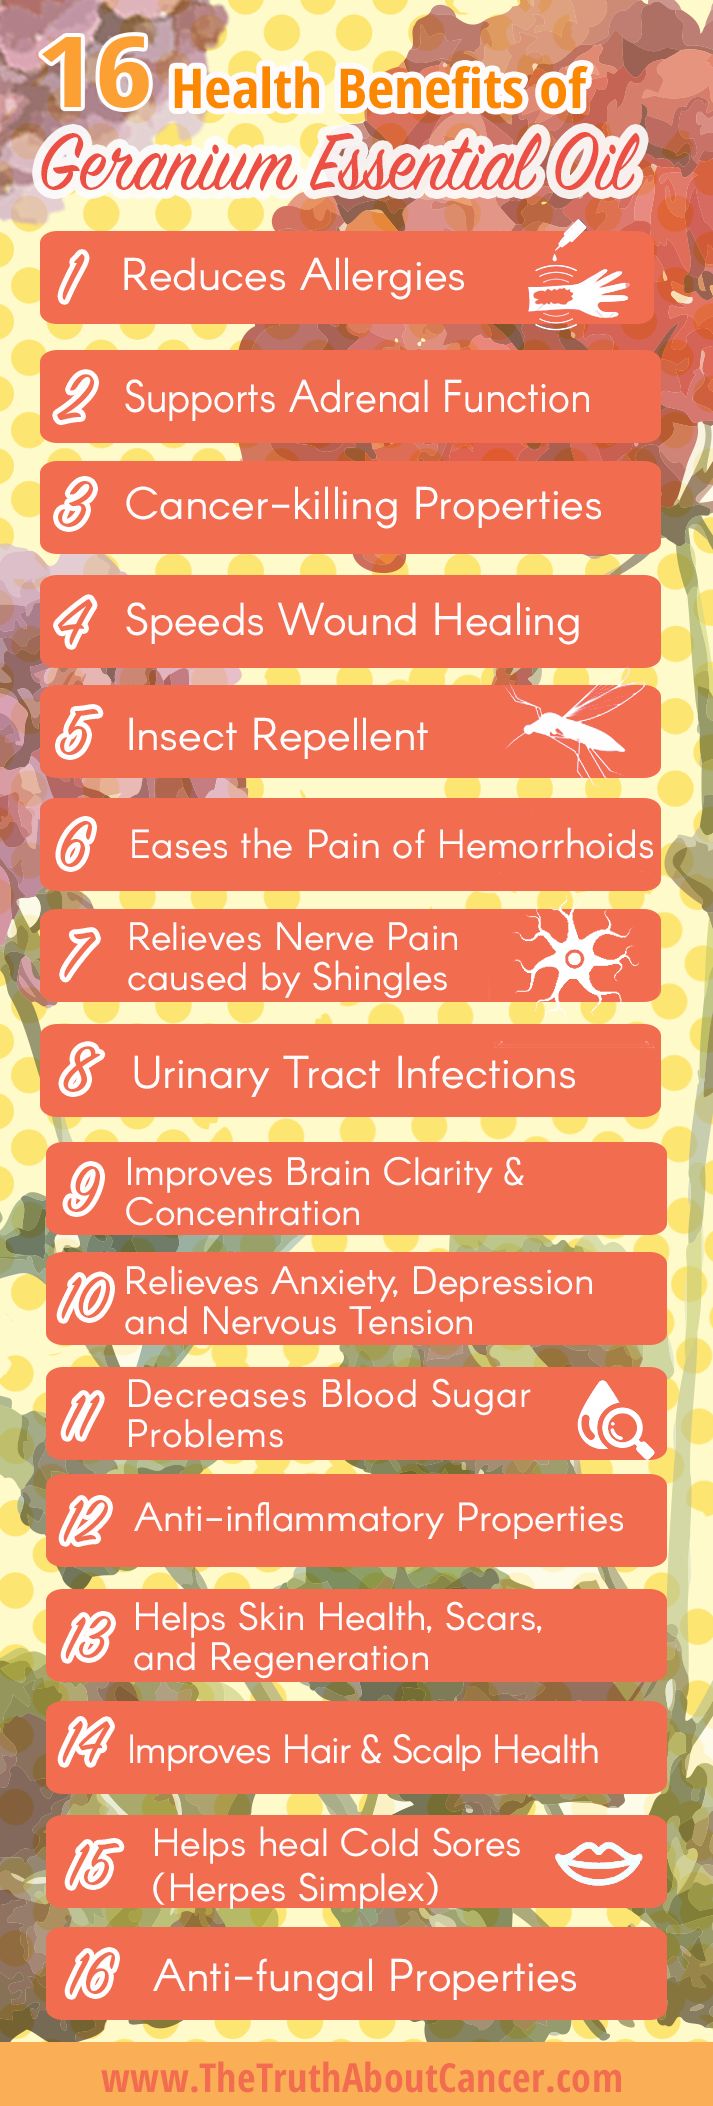 Geranium Essential Oil: 16 Health Benefits And Uses Infographic